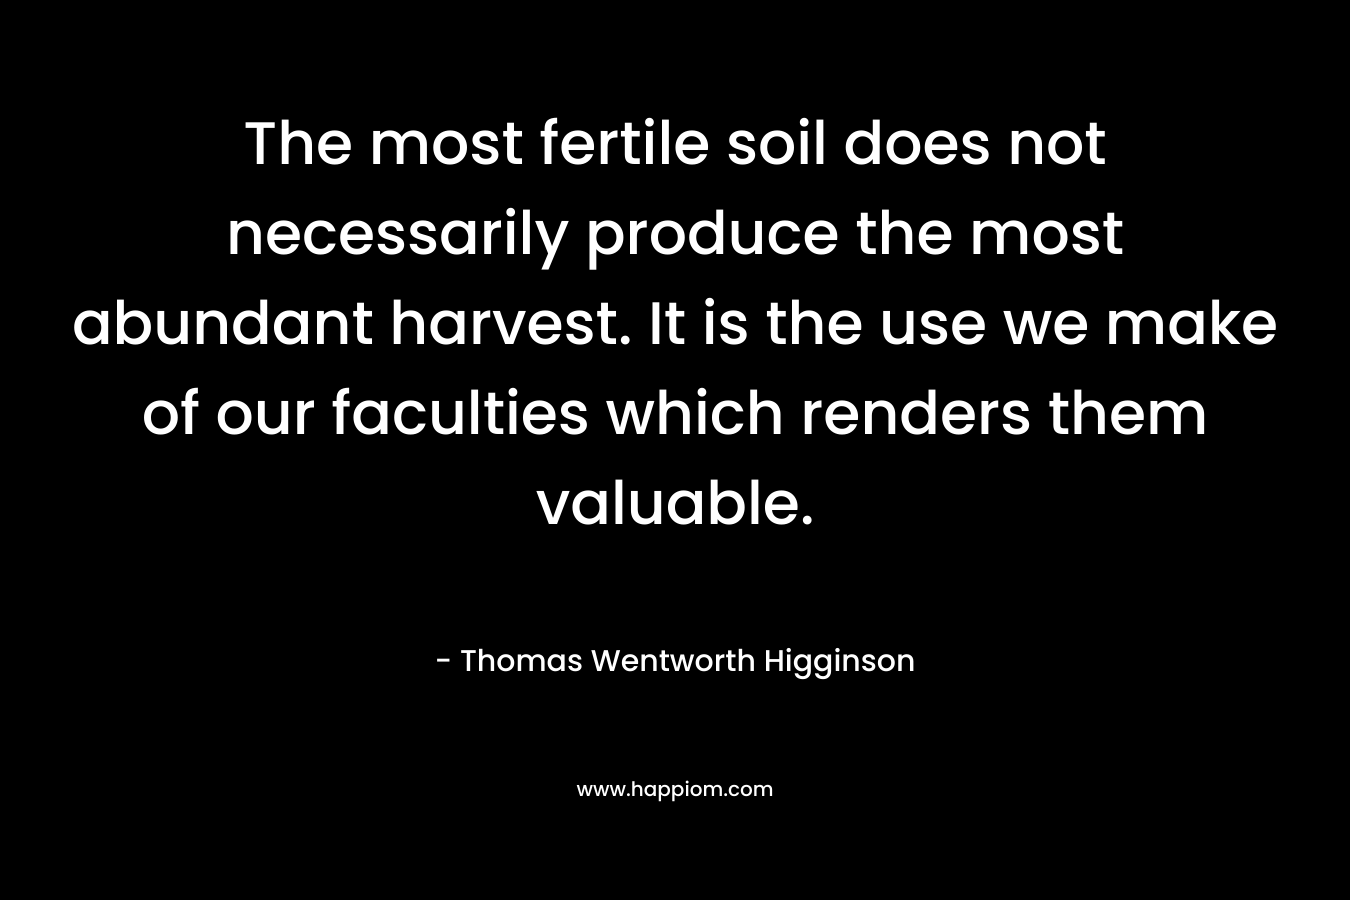 The most fertile soil does not necessarily produce the most abundant harvest. It is the use we make of our faculties which renders them valuable.